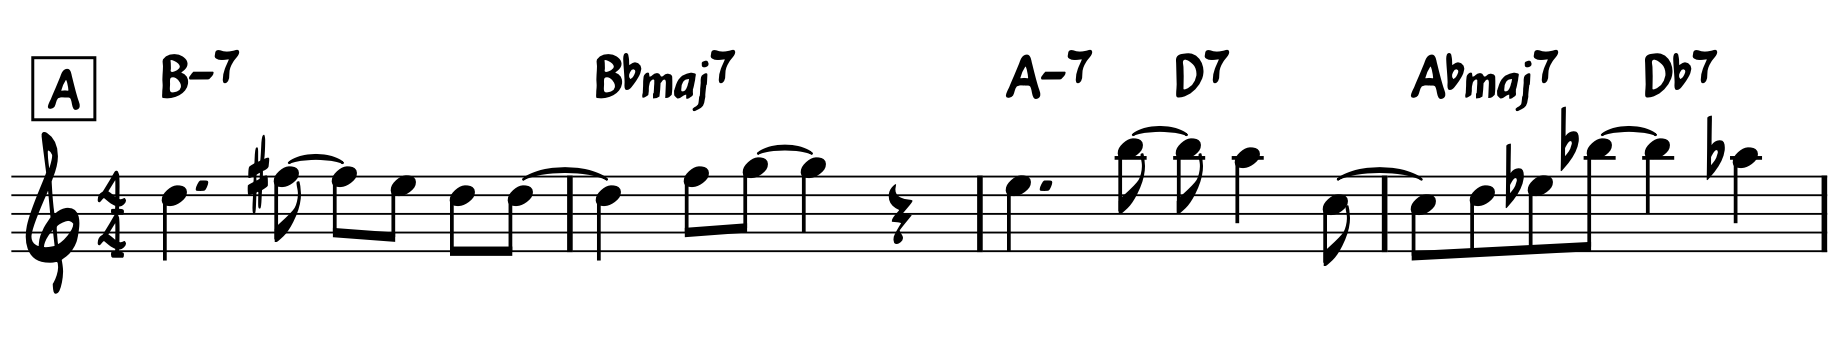 Lead Sheet Jazz tutorial: Music notation on a lead sheet that shows beat 3 is easier to read.